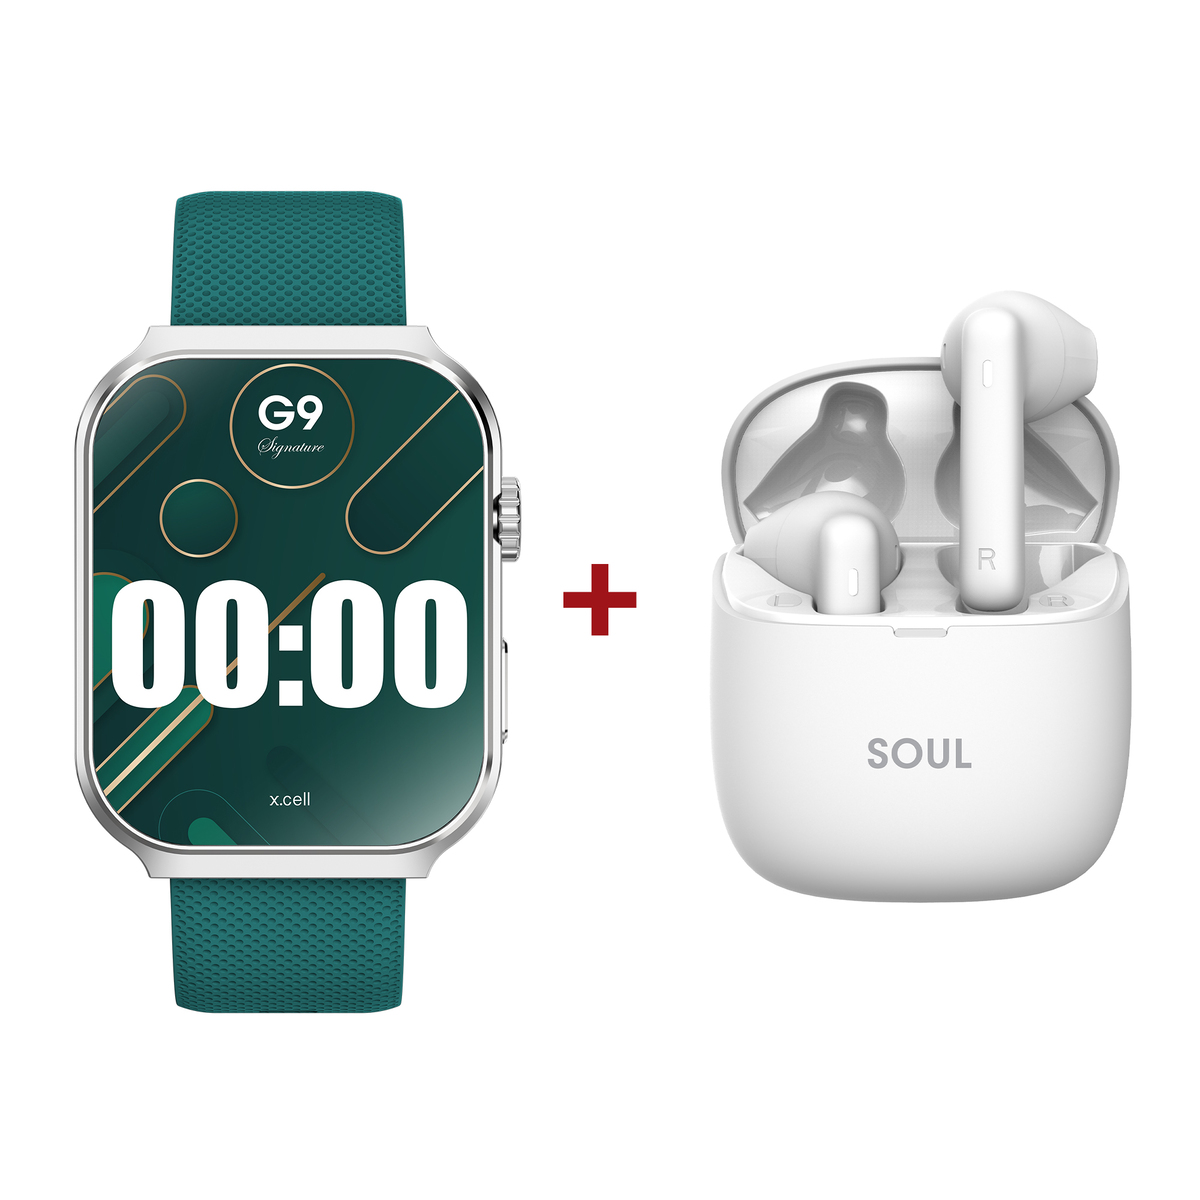 X.Cell G9 Signature 2.01" Smart Watch, Green + Soul 14 Wireless Earbuds with Mic, White